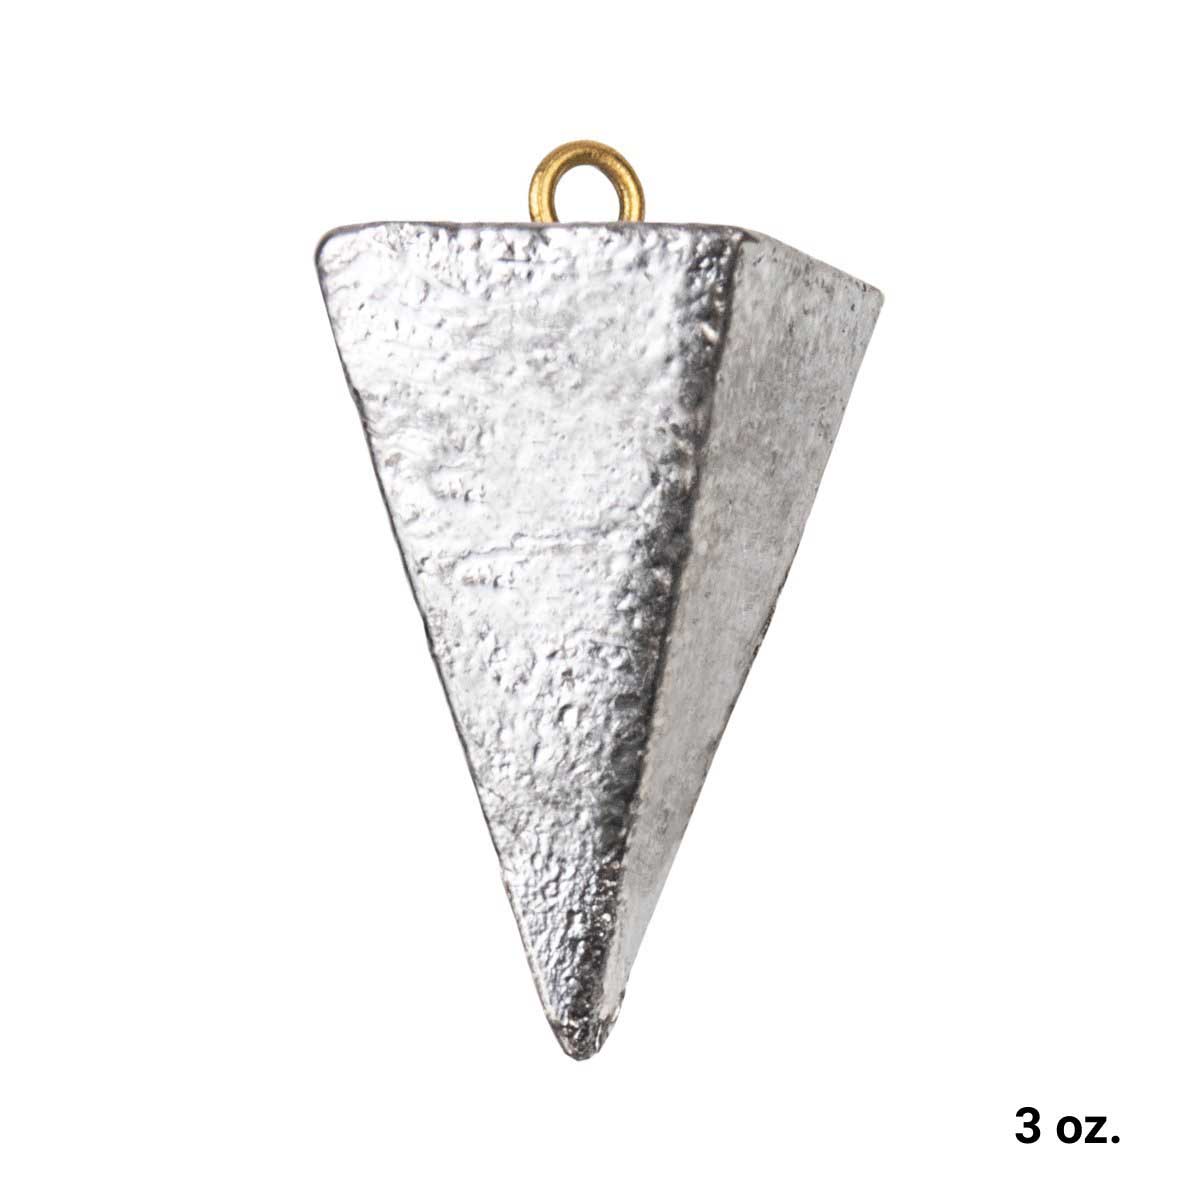 Pyramid Sinker, Lead Sinker for Freshwater and Saltwater Fishing, Weight (2 oz, 2.5 oz, 3 oz)